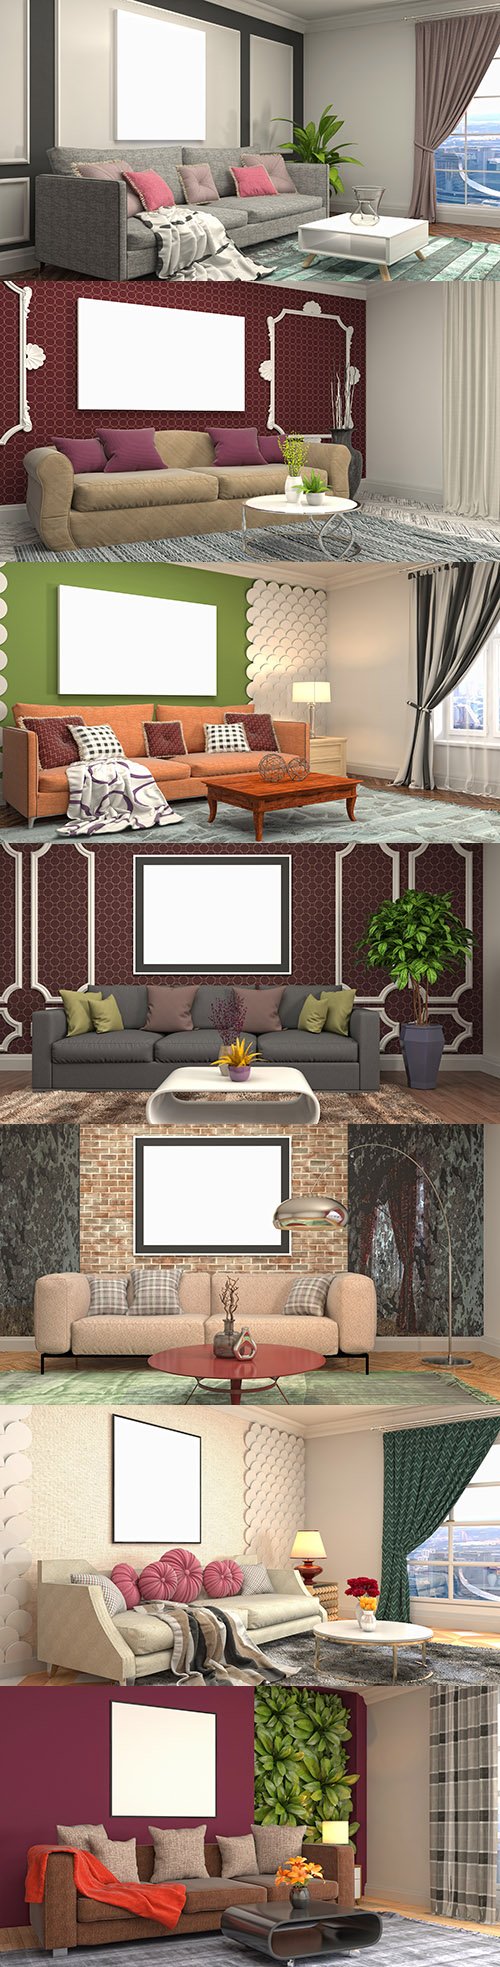 Interior design room with furniture and frame on wall